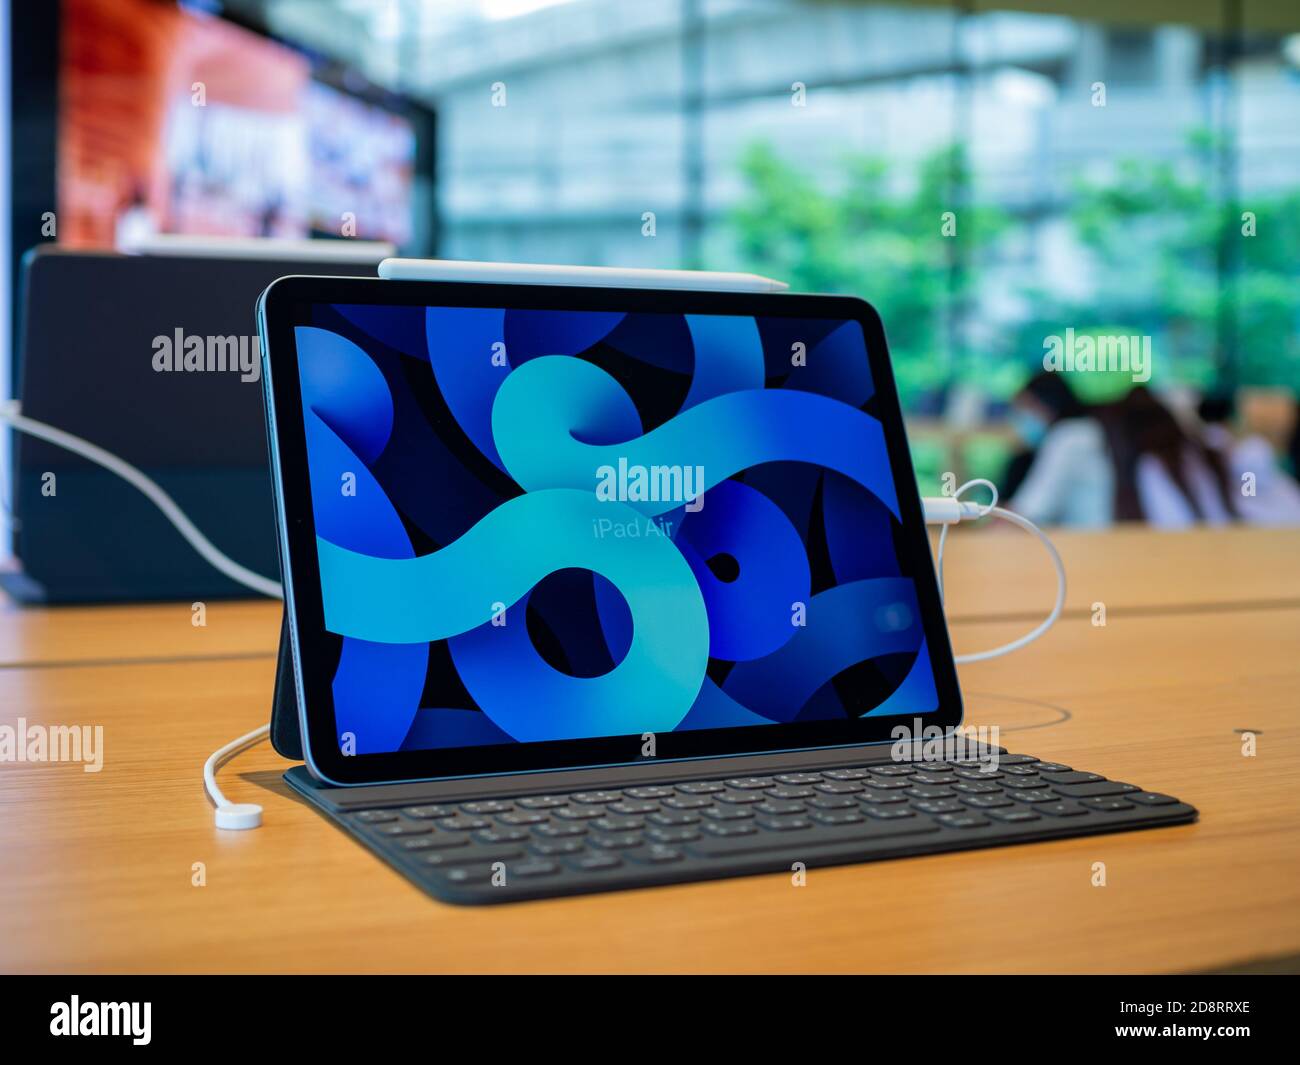 Bangkok, Thailand - October 29, 2020: The new iPad Air 2020 device is  installed at the Central World Apple Store for customers to view and trial  Stock Photo - Alamy